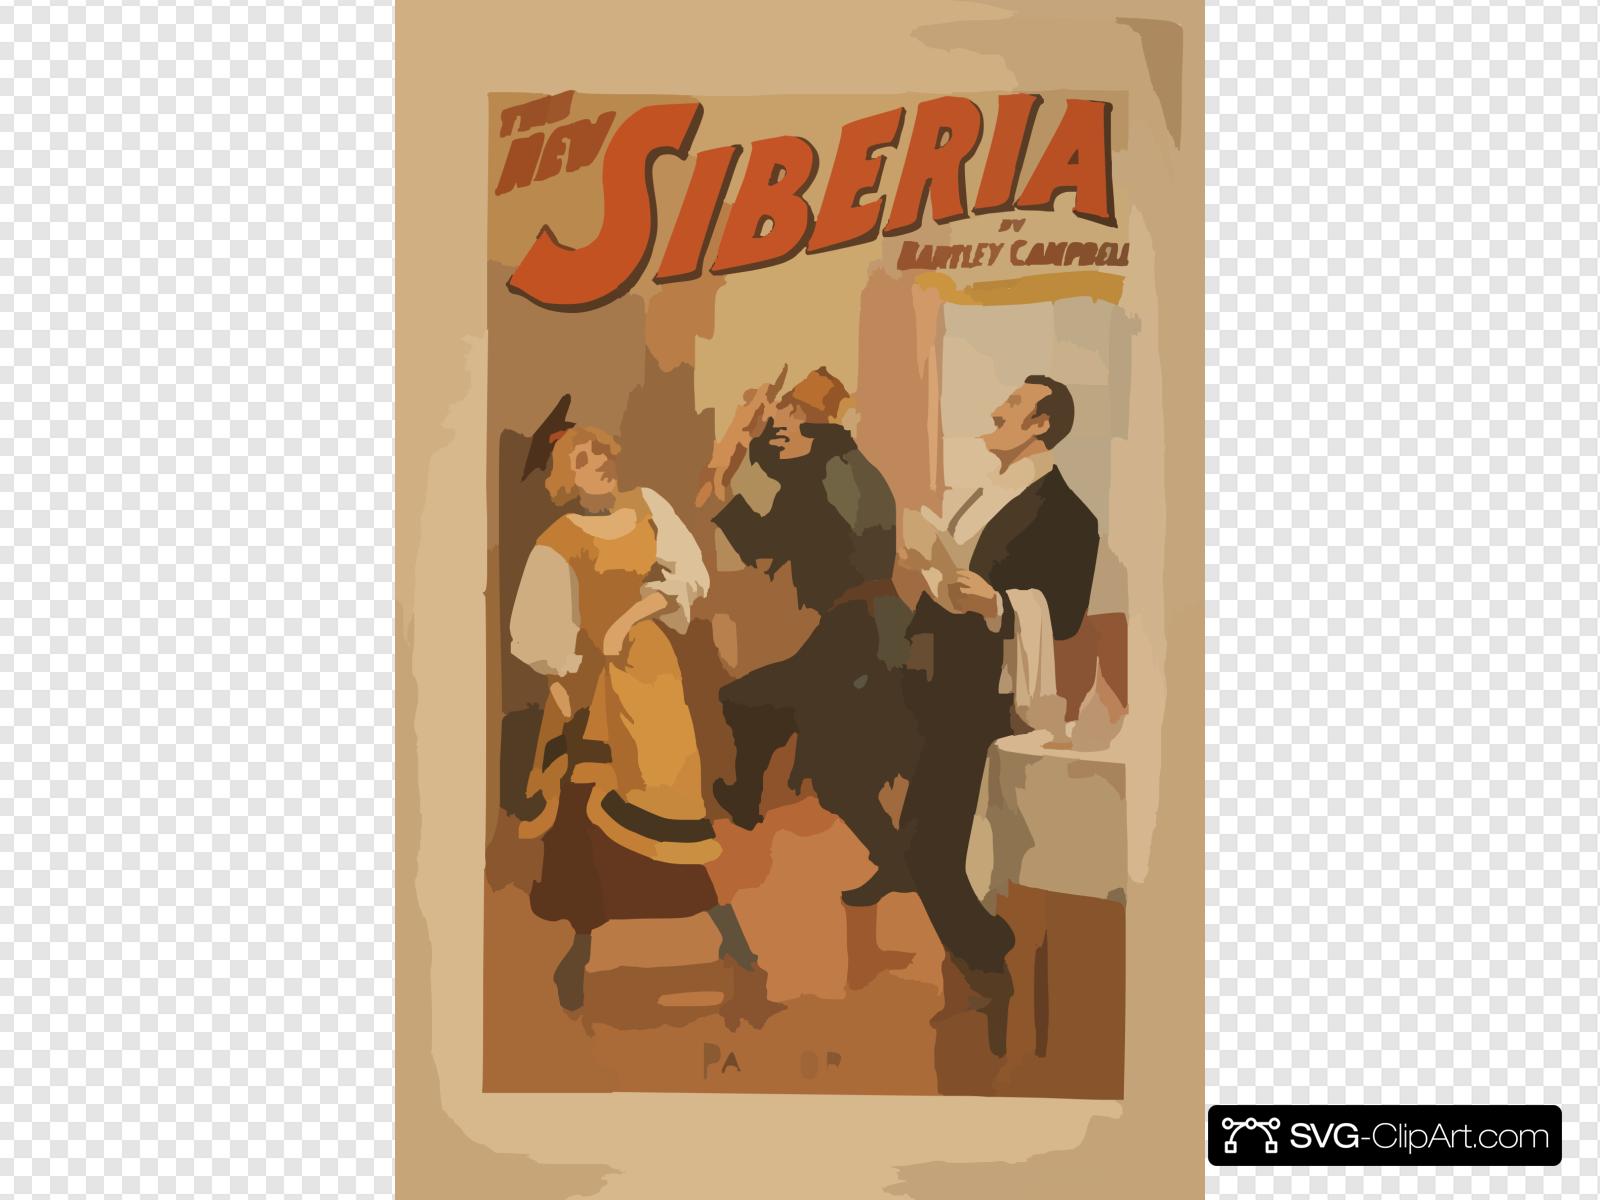 The New Siberia By Bartley Campbell. Clip art, Icon and SVG.